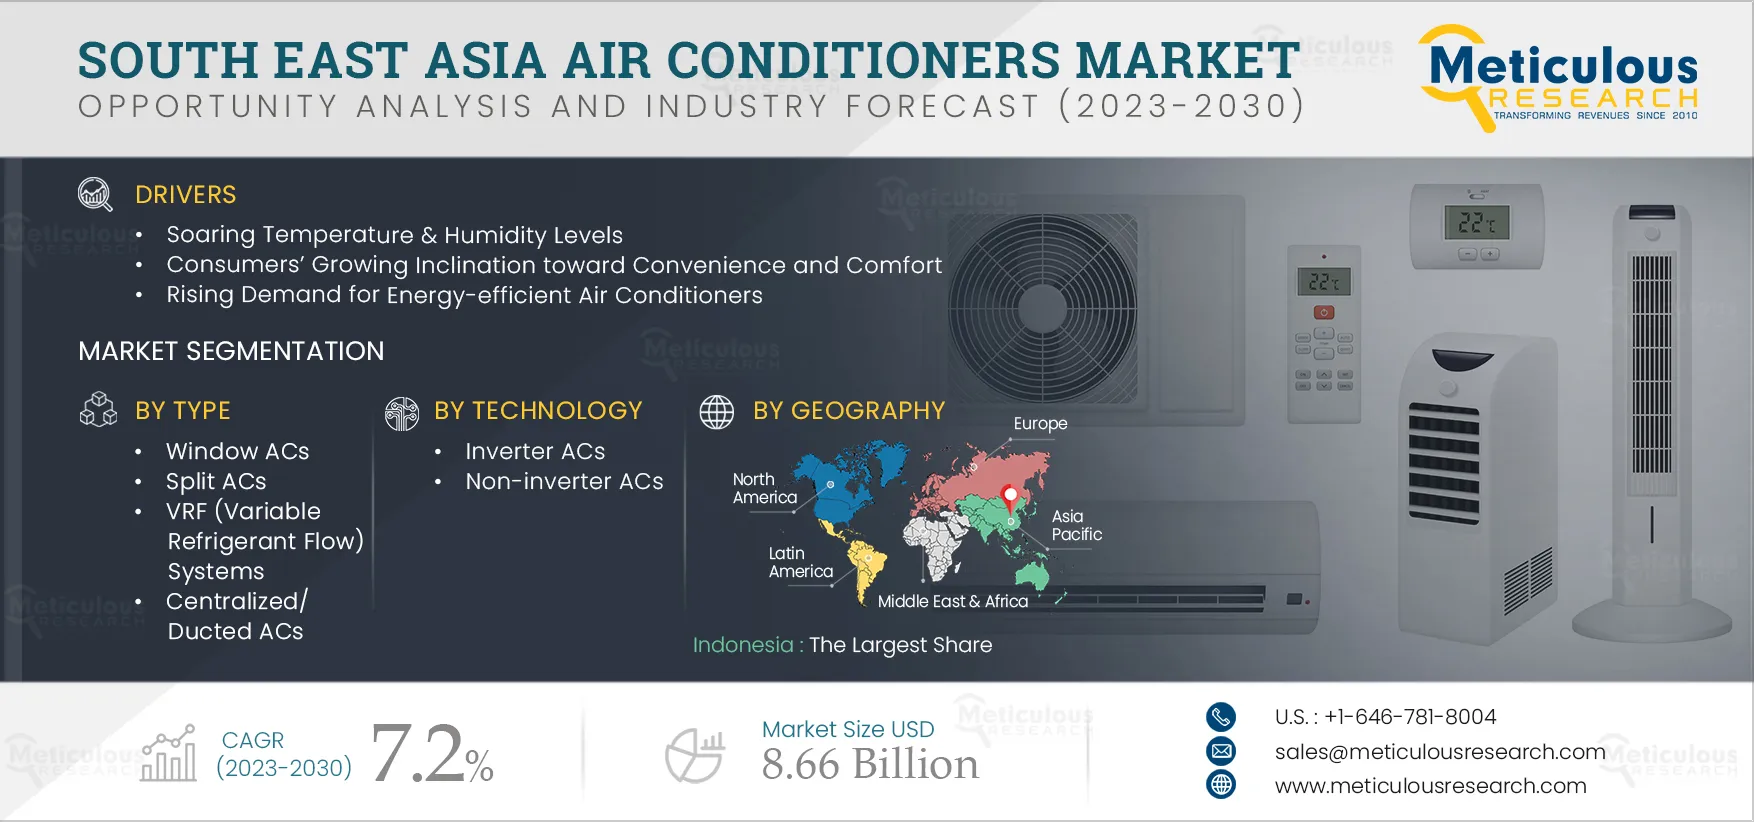 South East Asia Air Conditioners Market 